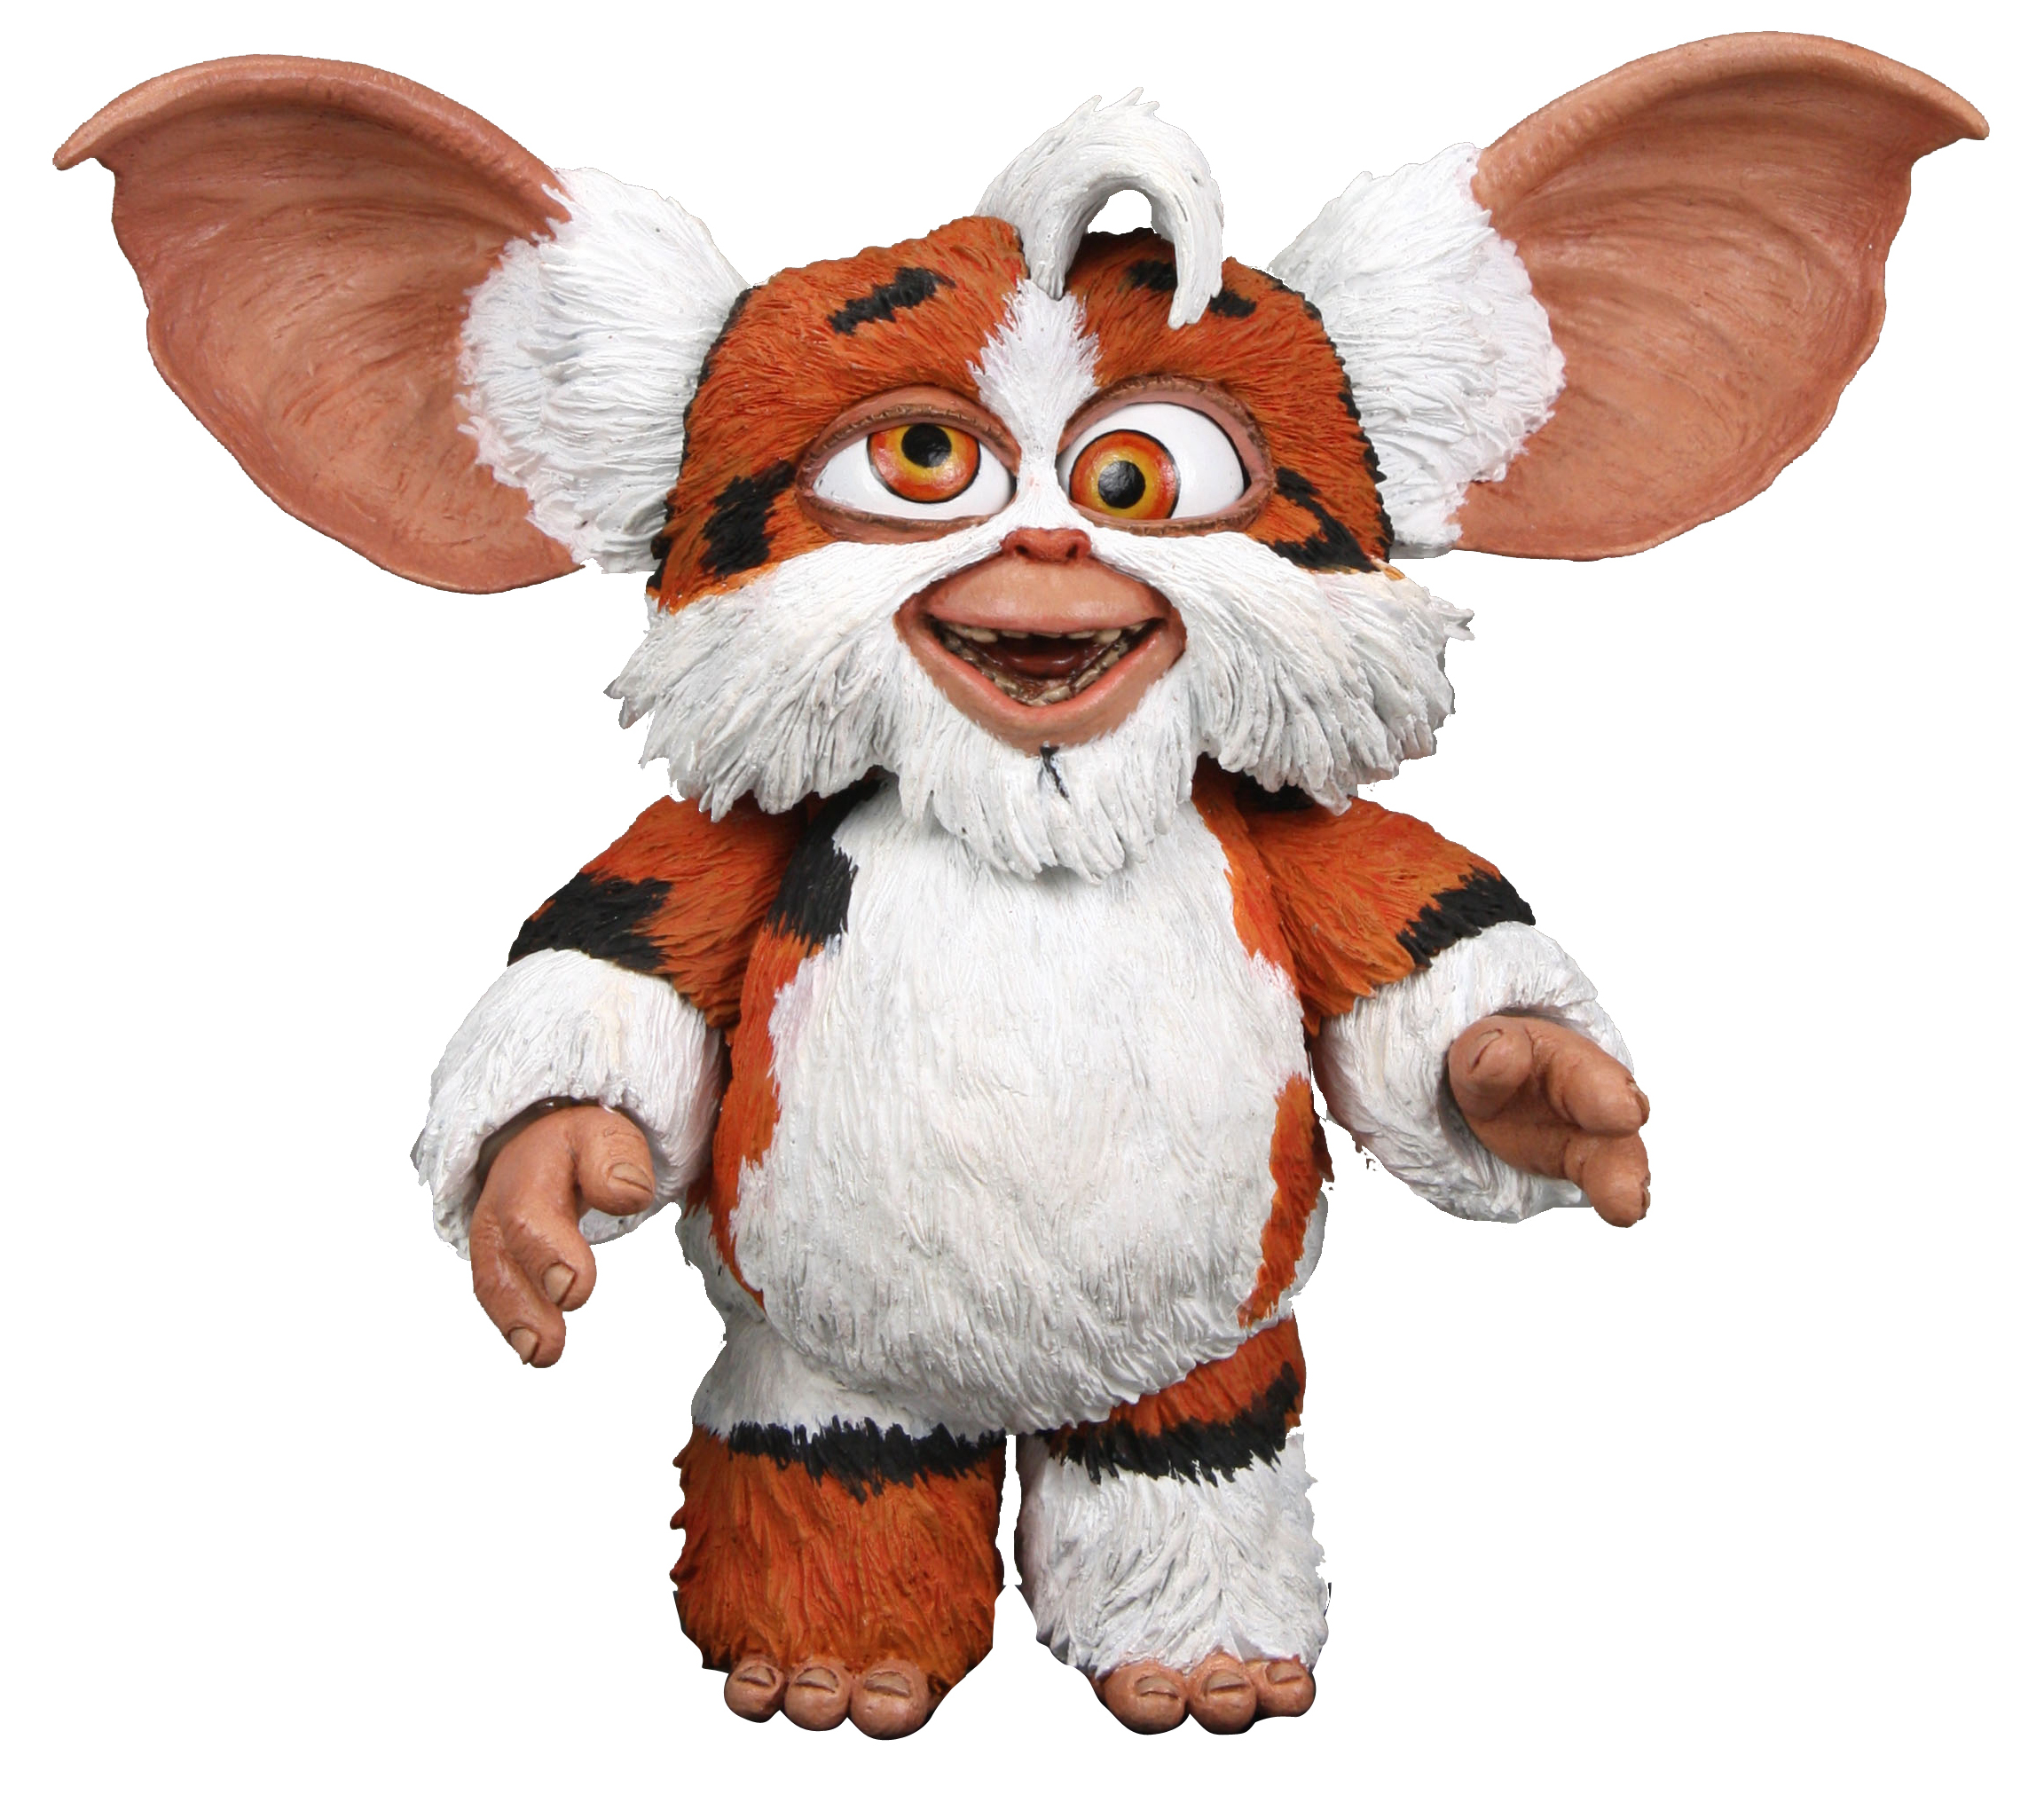 Gremlins 2: The New Batch - Daffy 7" Action Figure